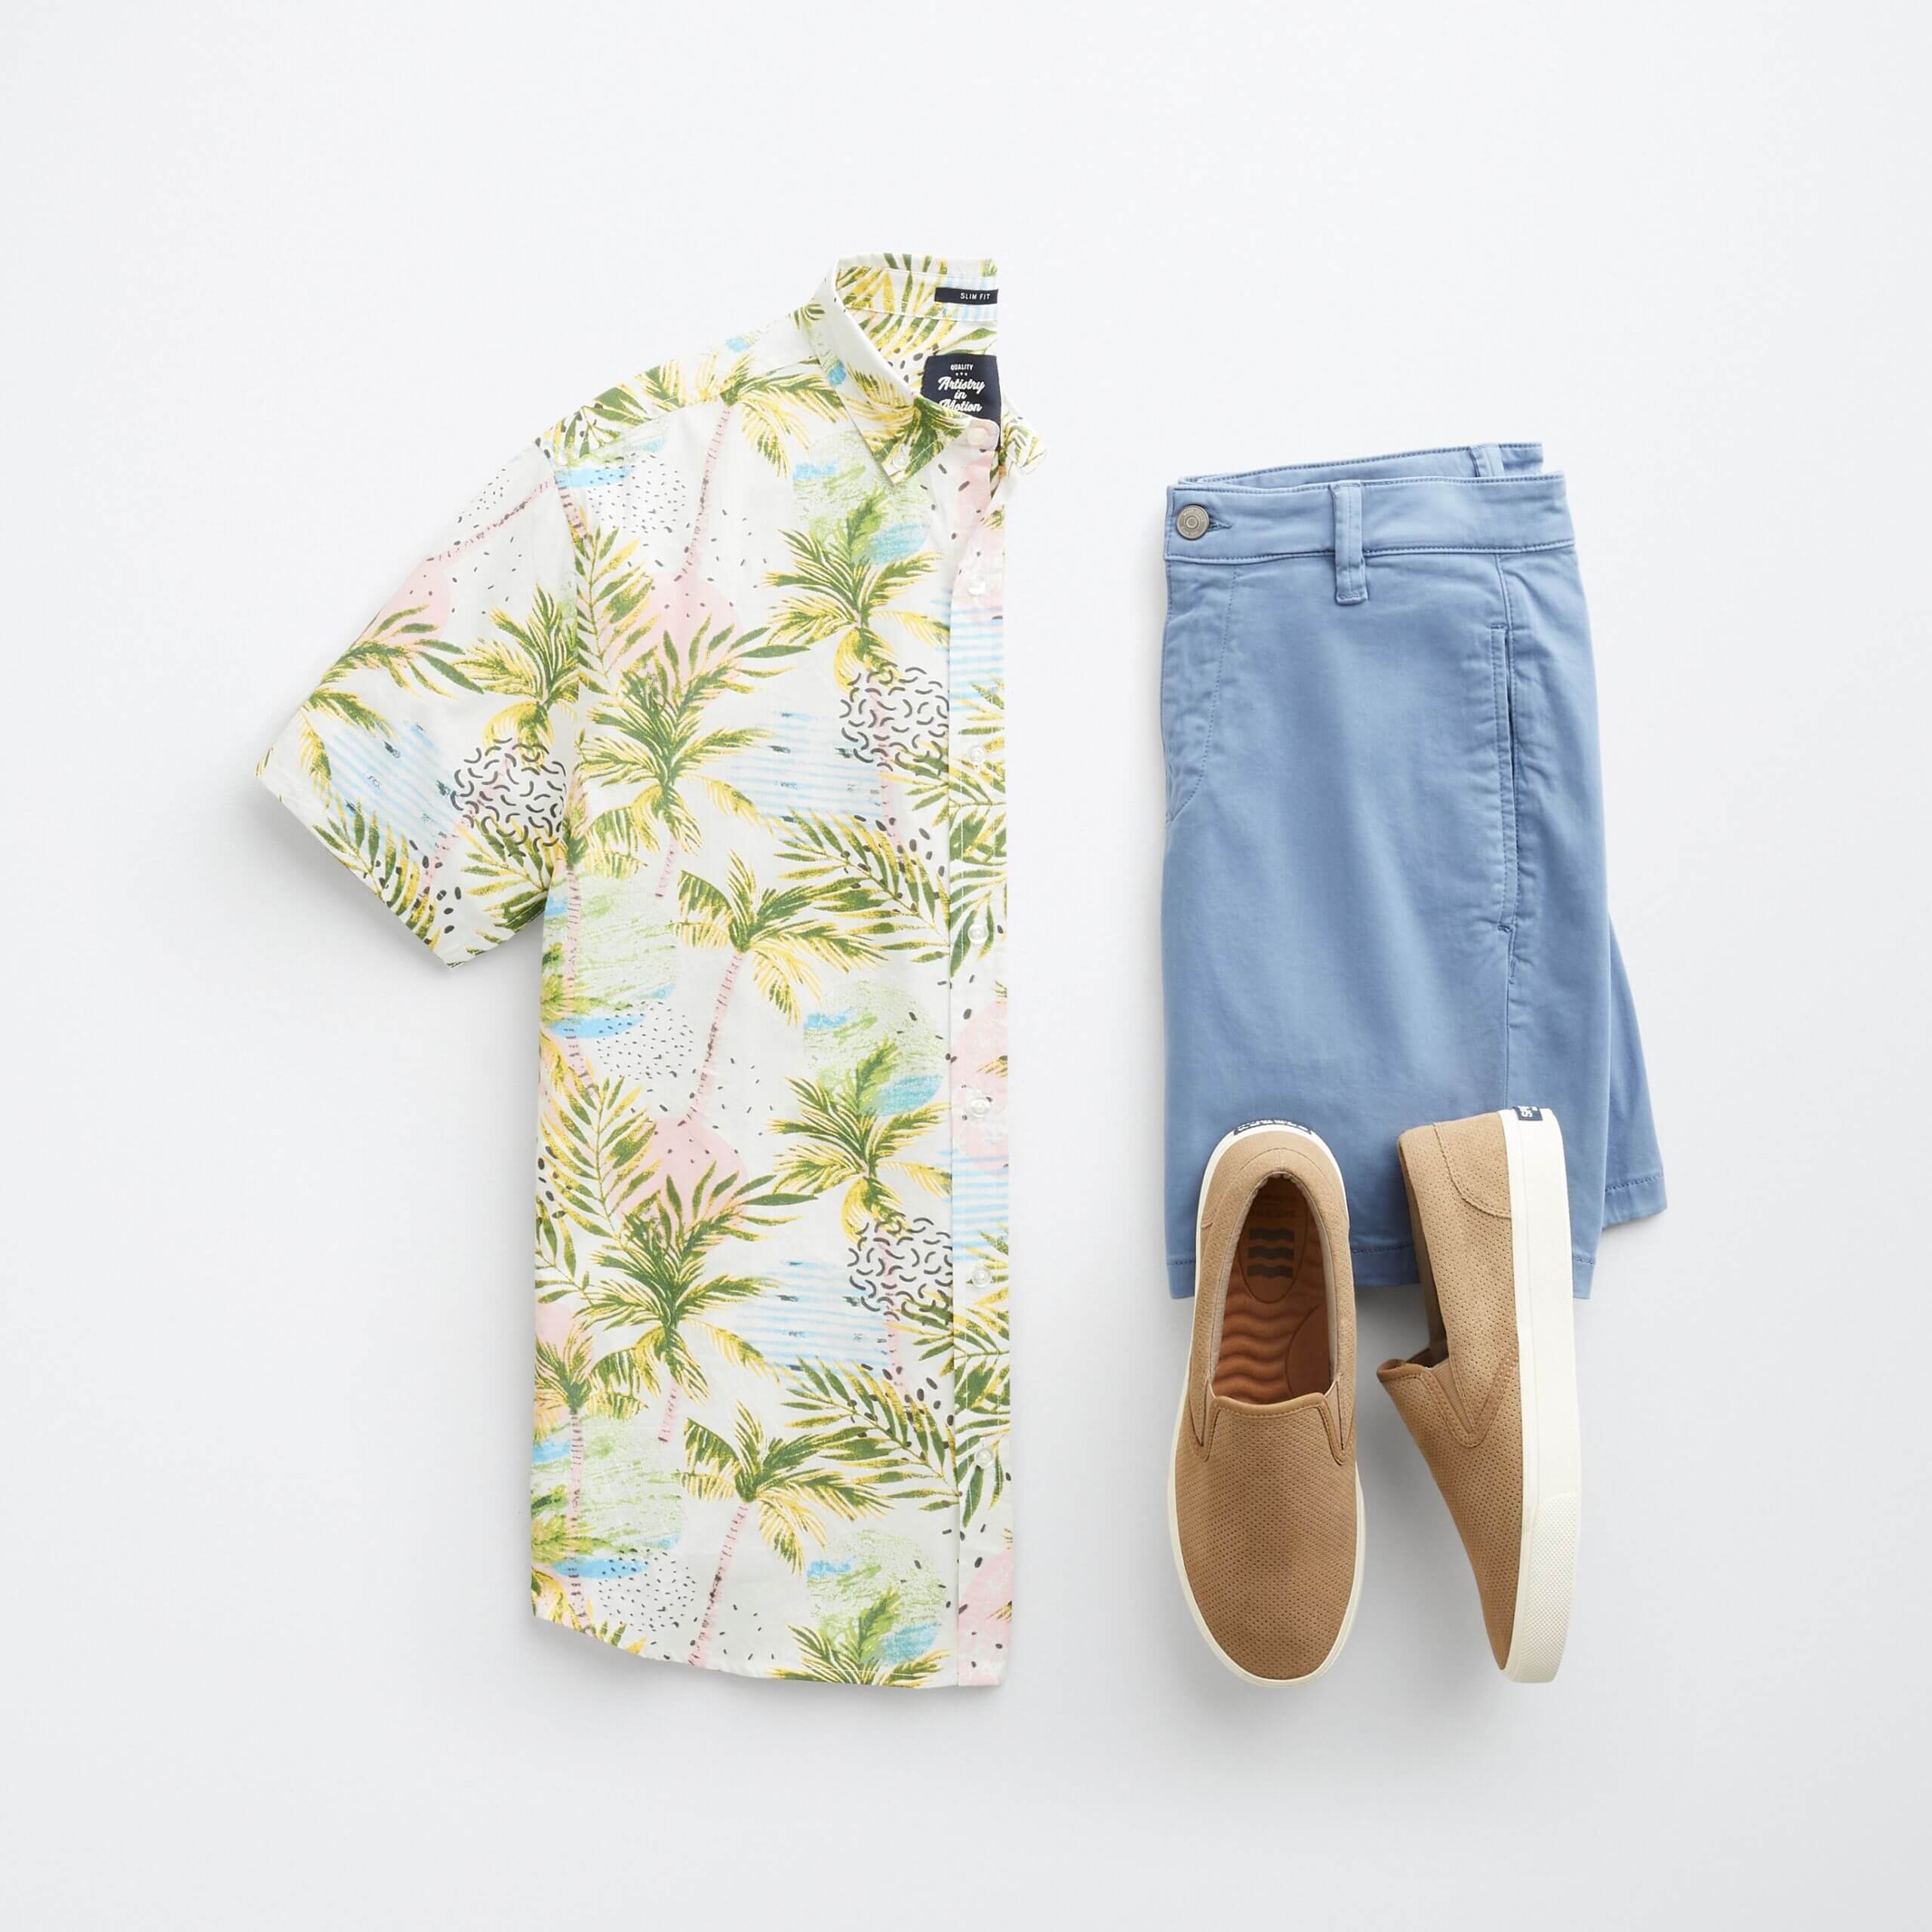 Stitch Fix men’s resort wear outfit with colorful palm-print short-sleeve shirt, blue shorts and tan slip-on sneakers.